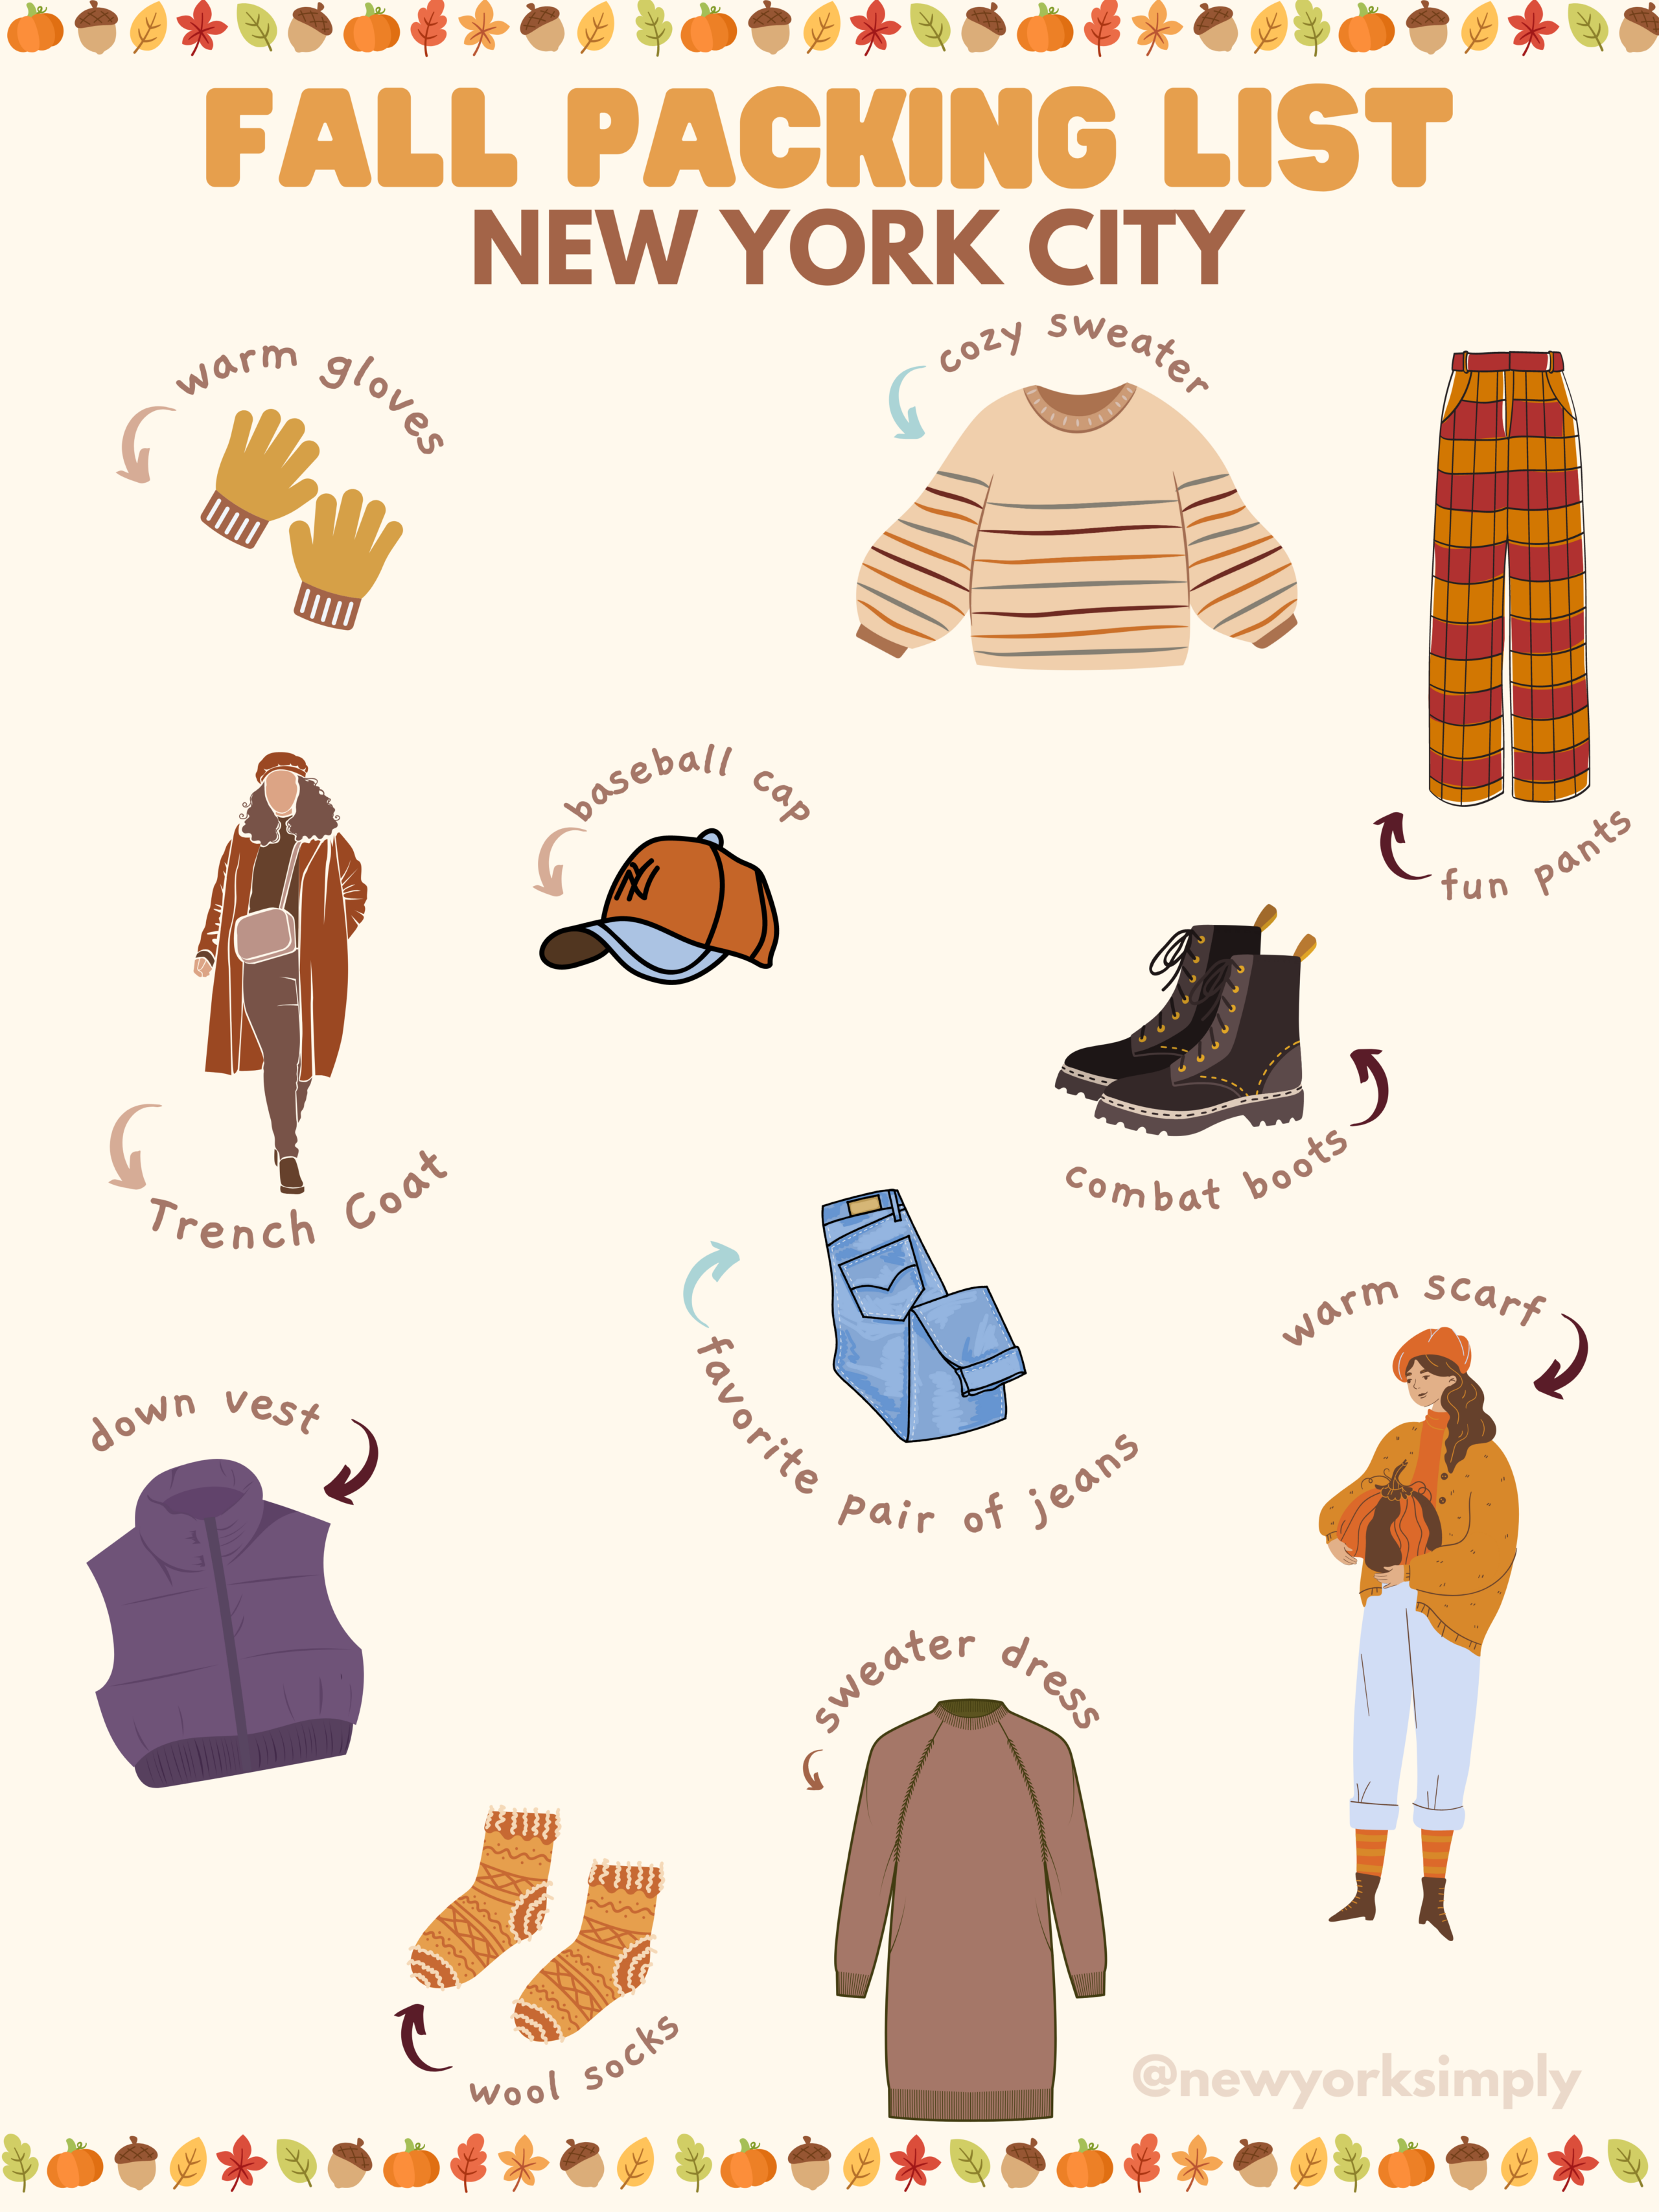 Fall packing list 
What to wear in New York in the fall